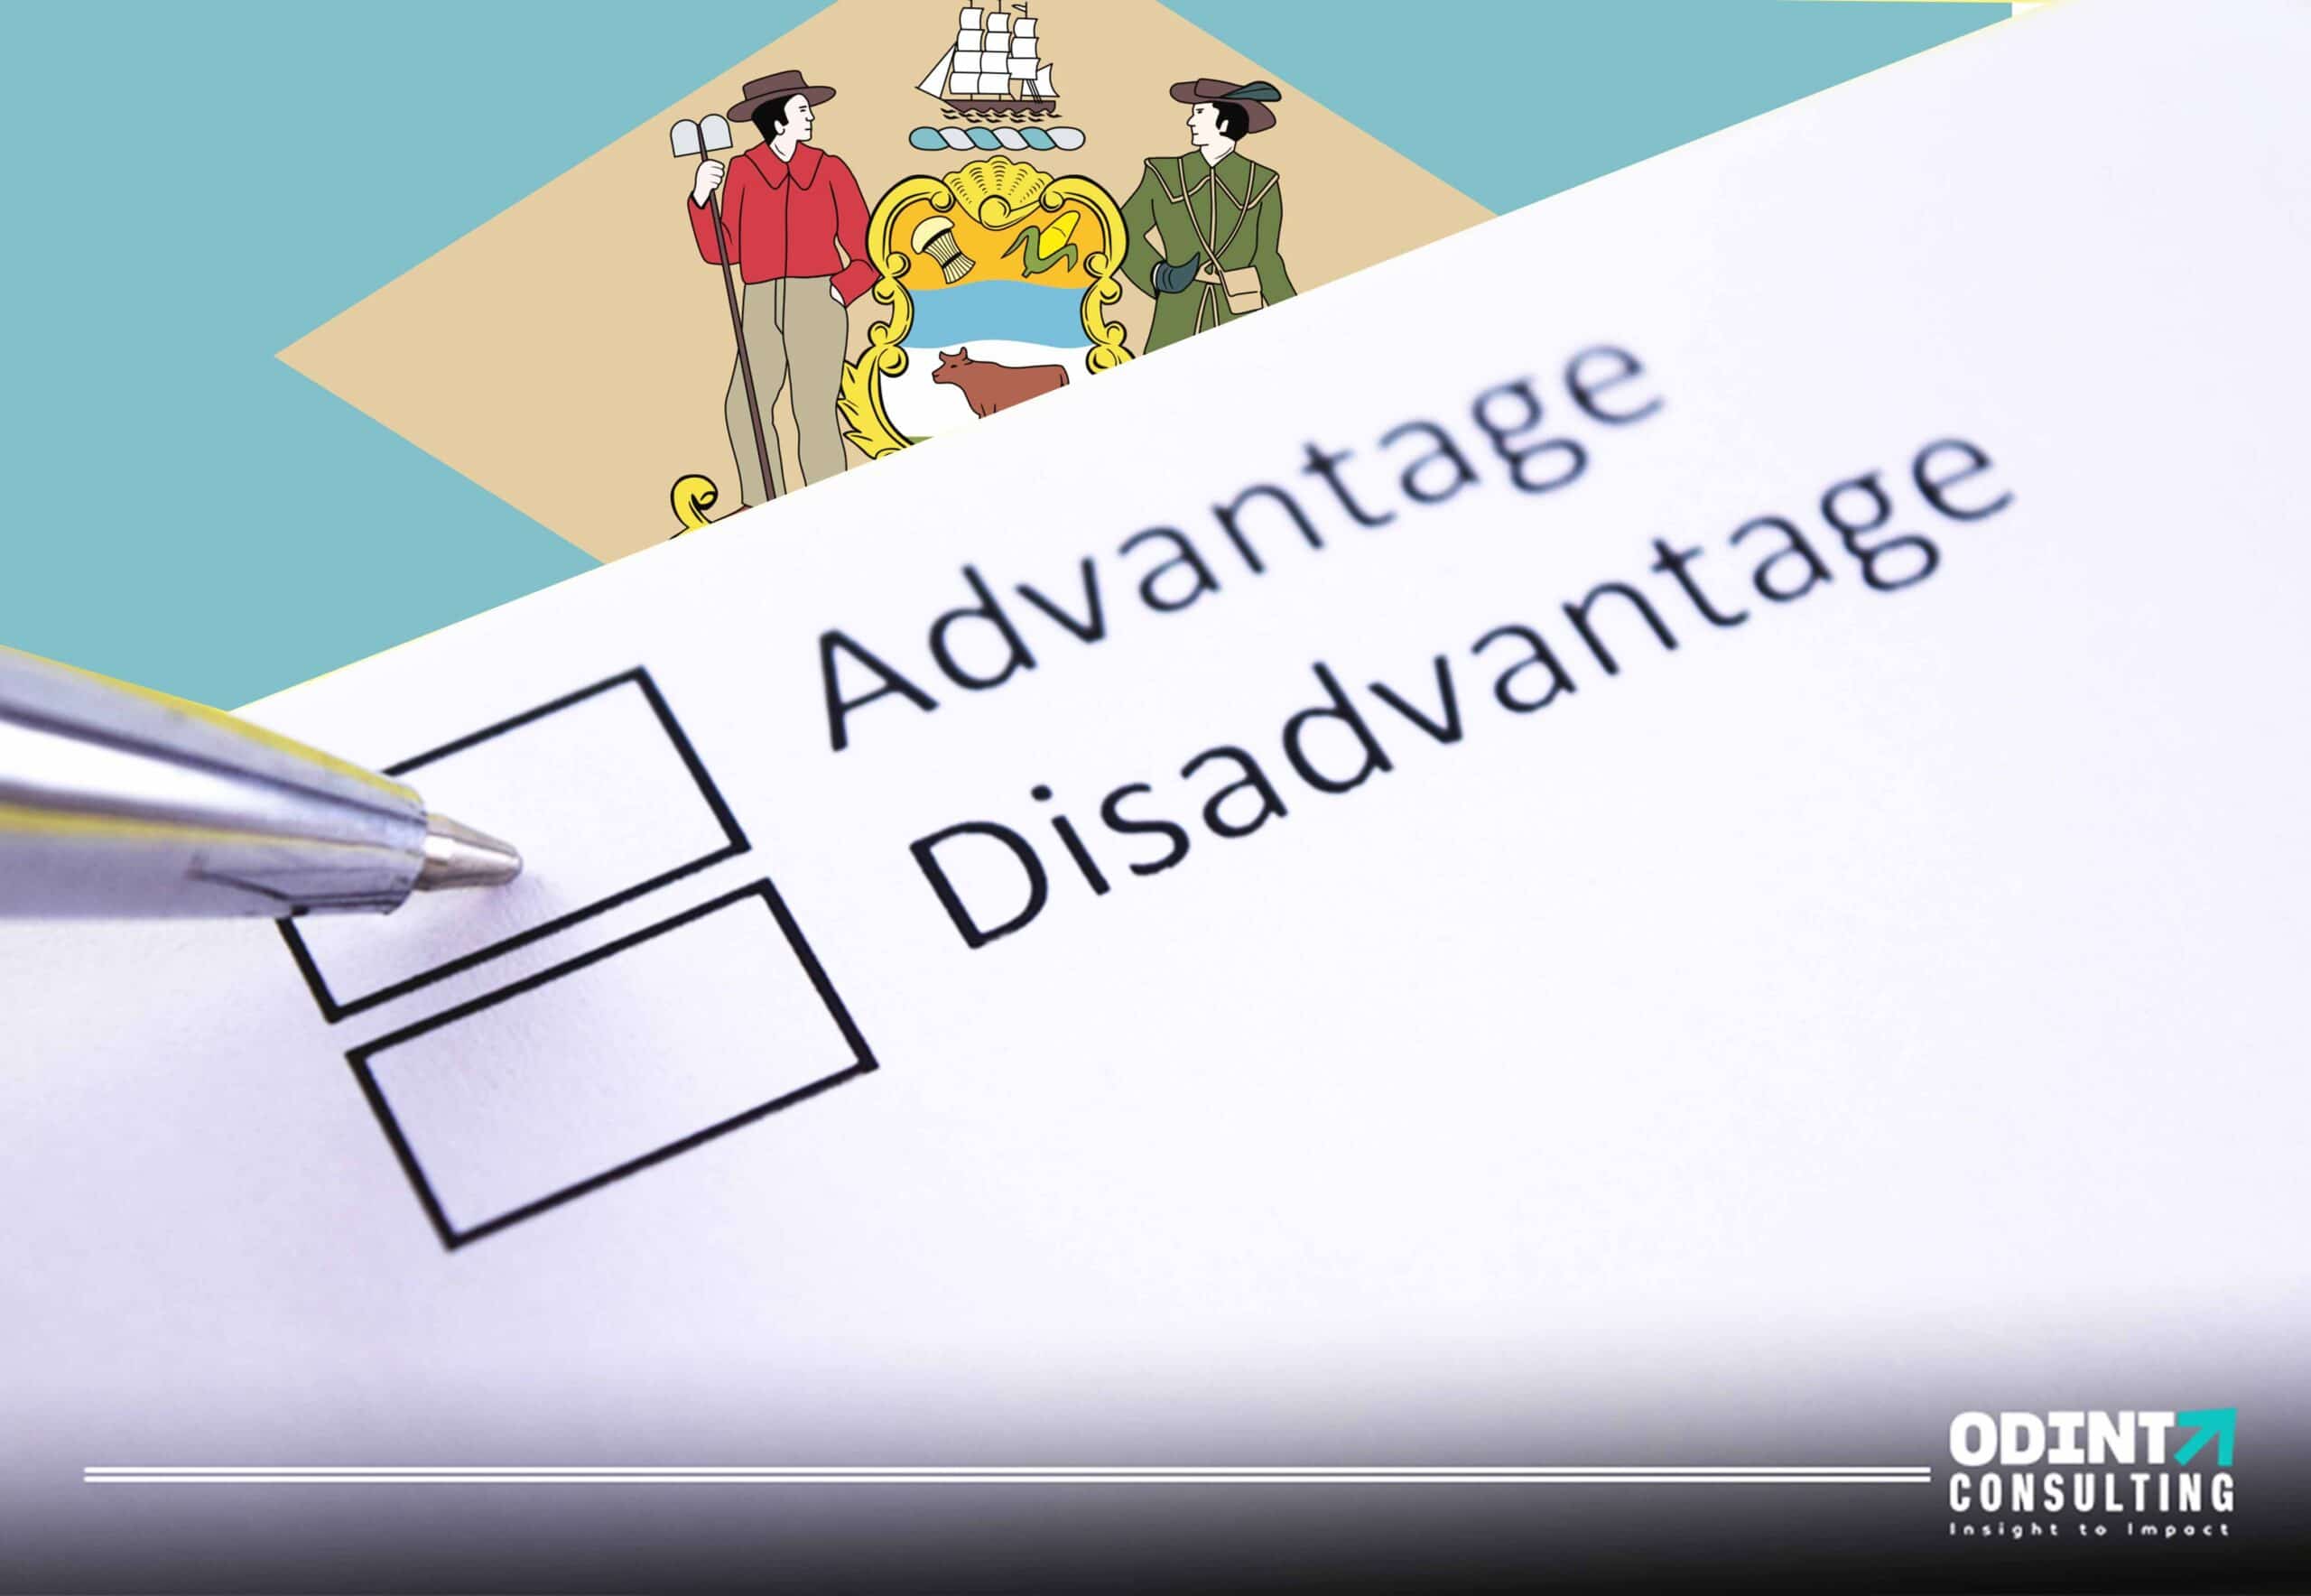 advantages and disadvantages of delaware company formations